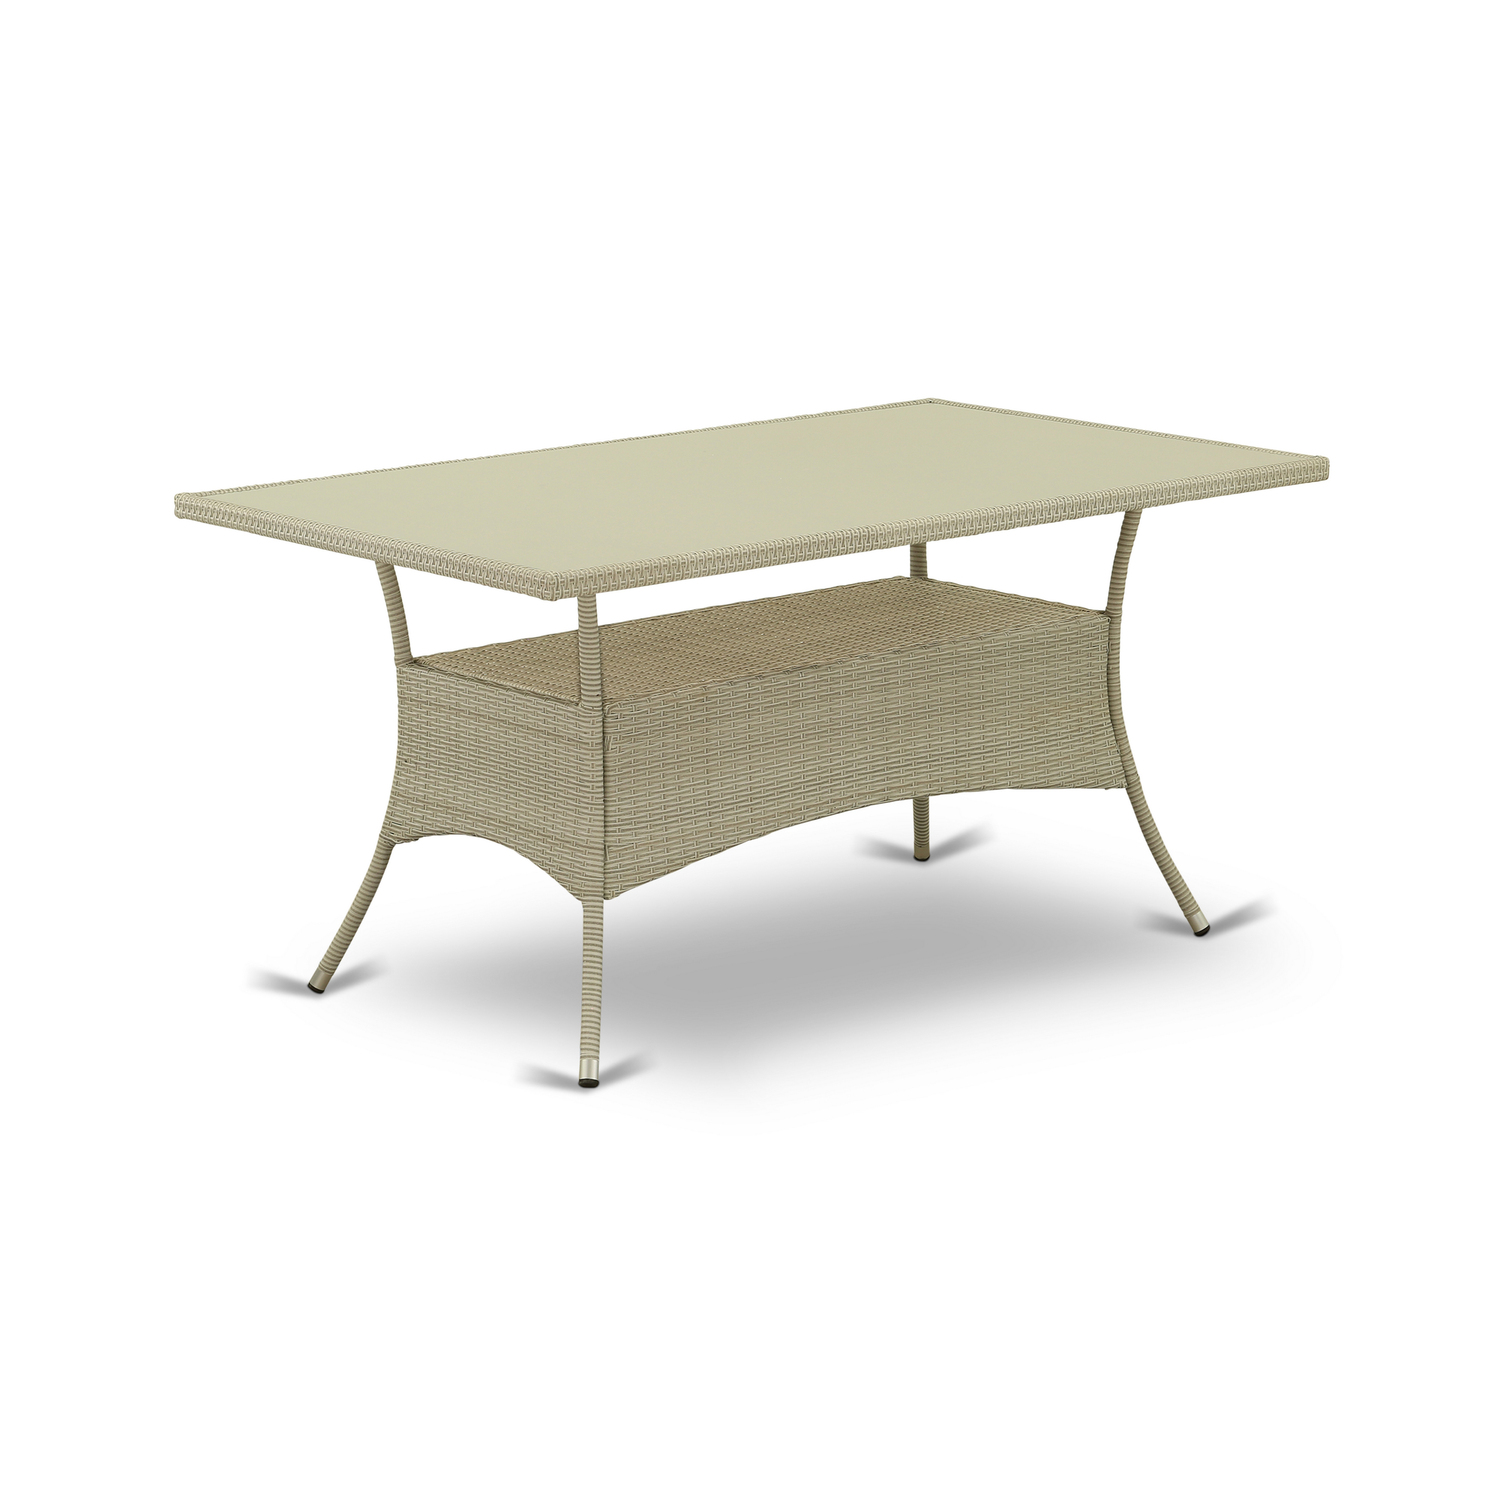 East West Furniture Oslo Metal and PE Wicker Patio Dining Table in Natural - image 3 of 3